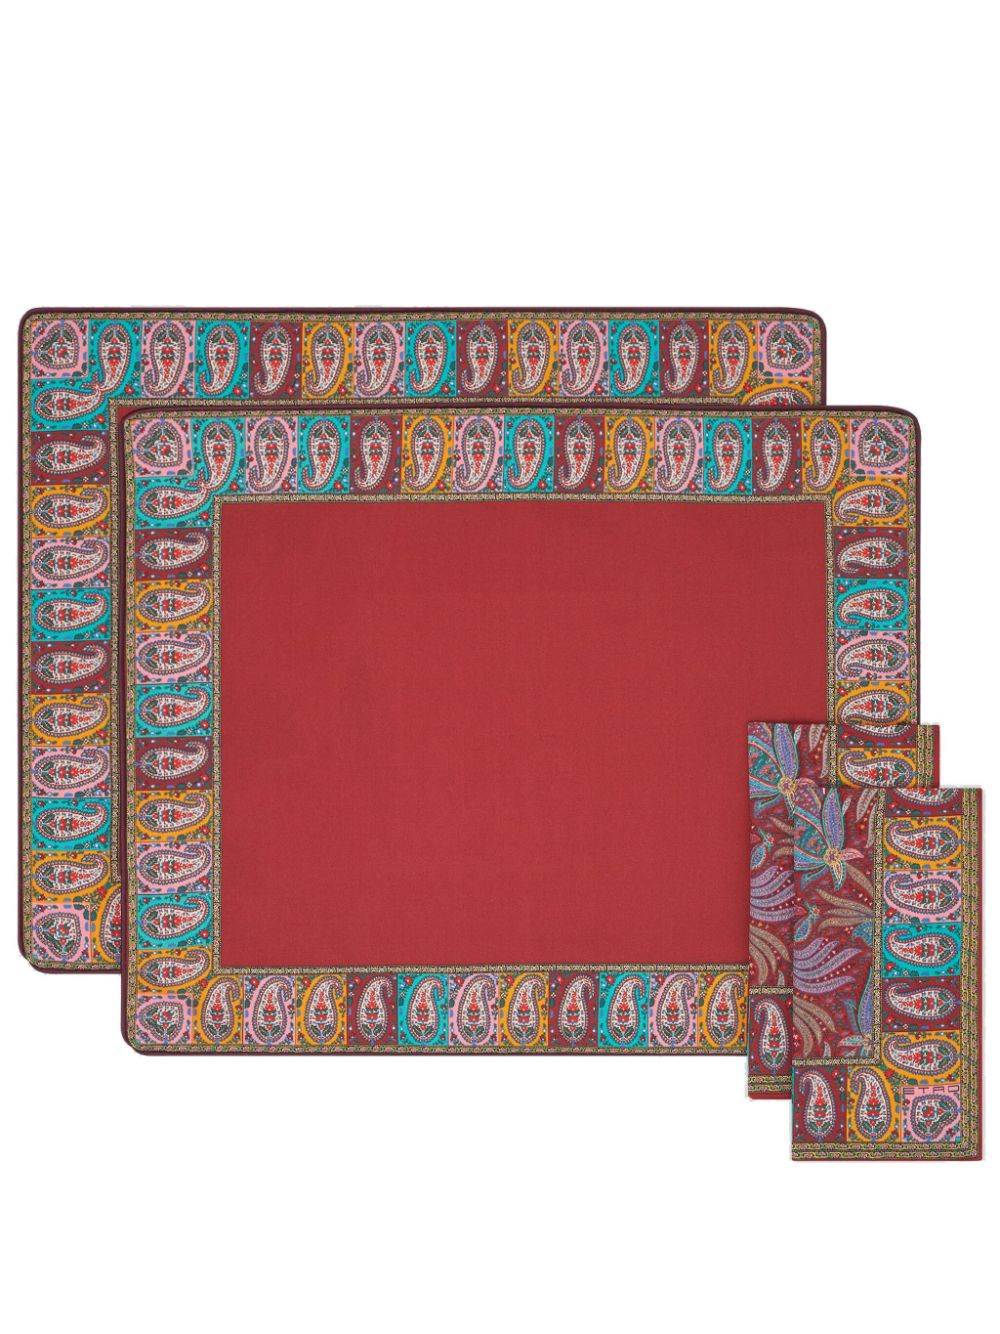 ETRO HOME paisley-print cotton placemats (set of two) - Red von ETRO HOME